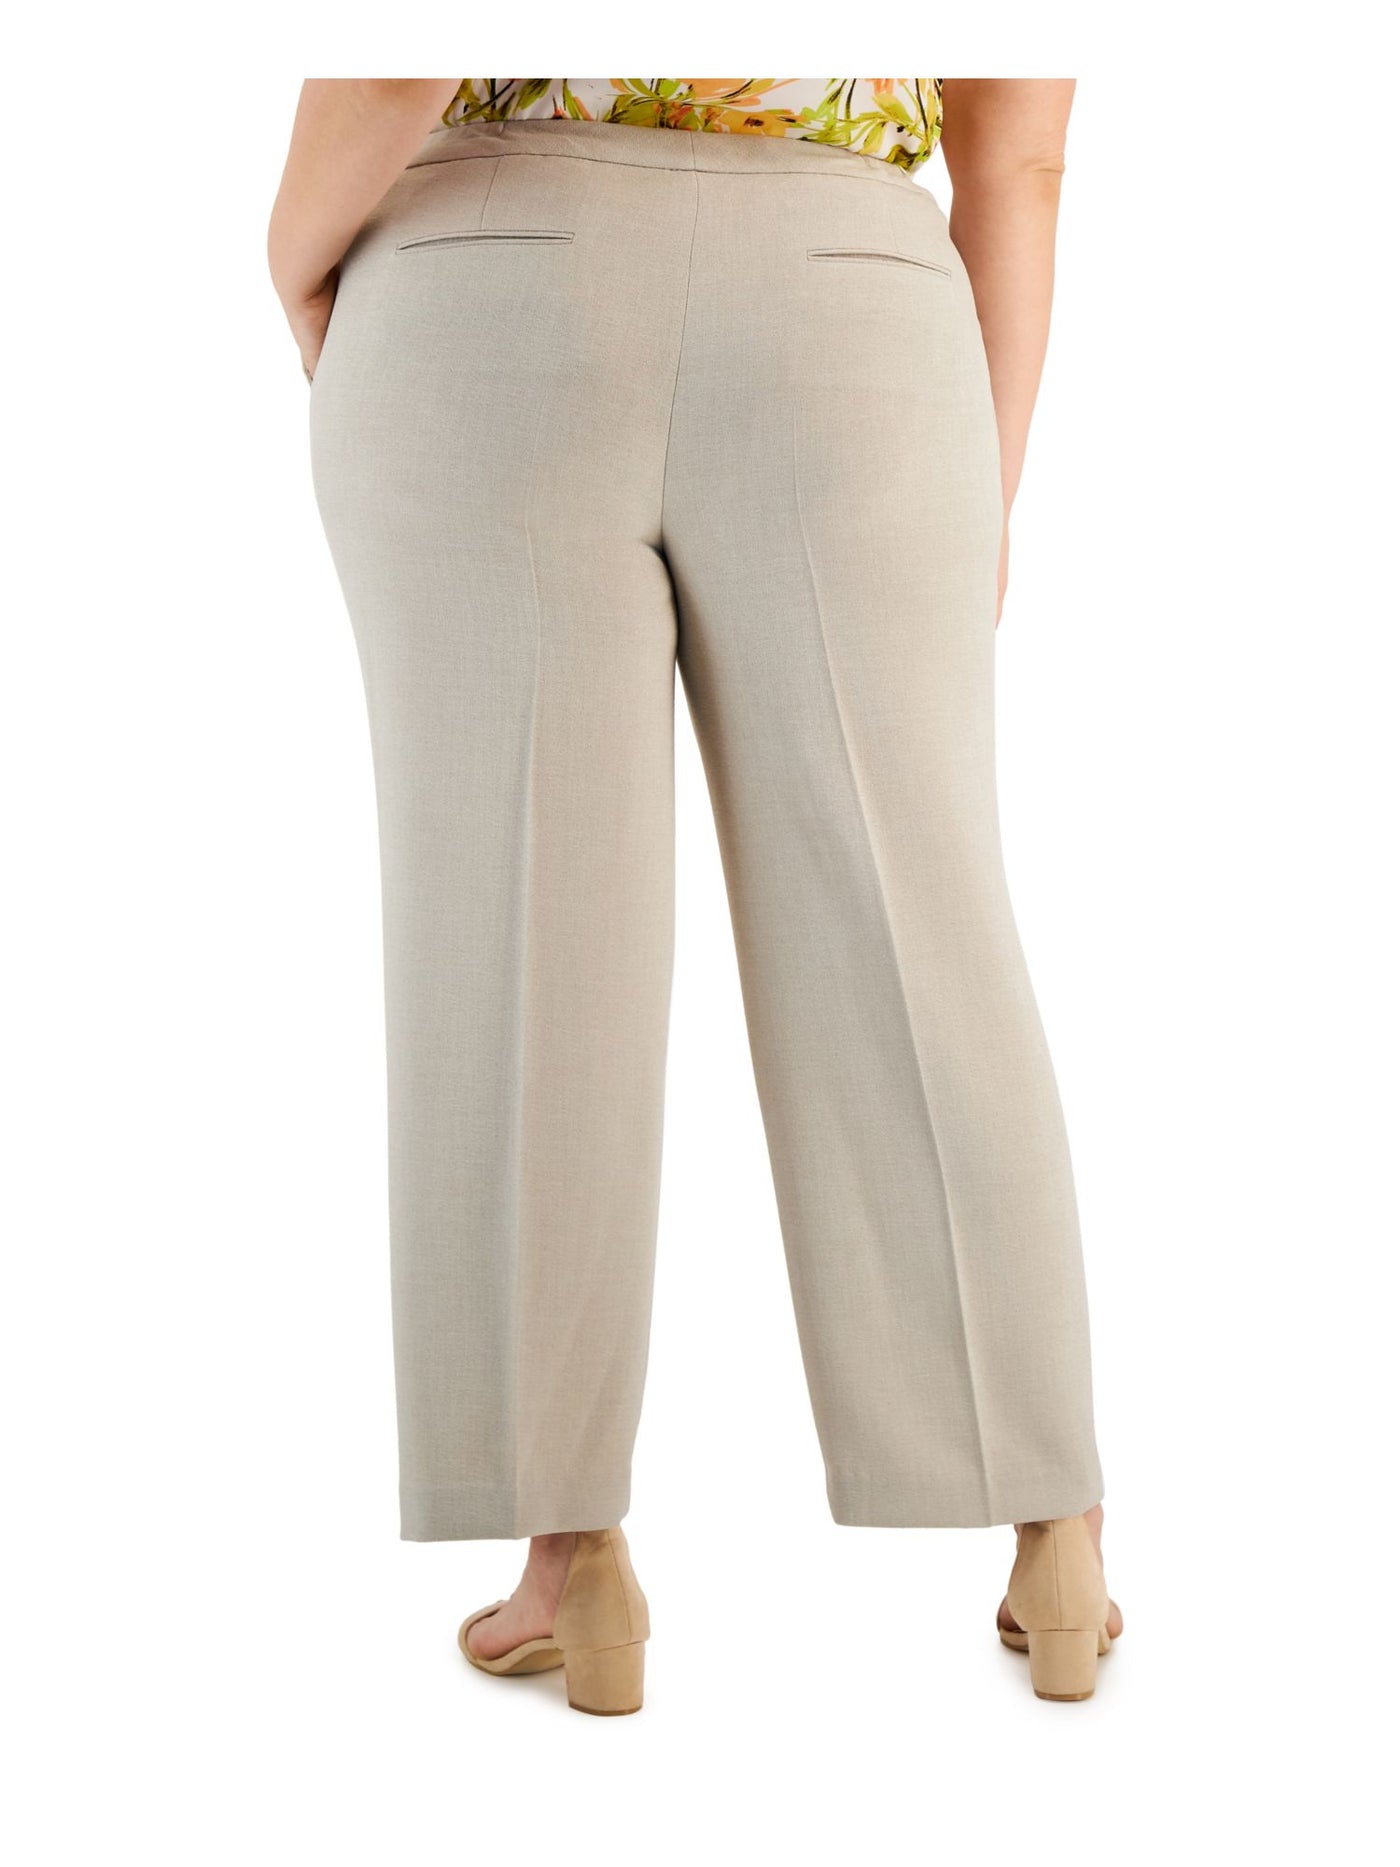 KASPER Womens Beige Zippered Pocketed Extended Hook And Bar Closure Wear To Work Straight leg Pants Plus 18W